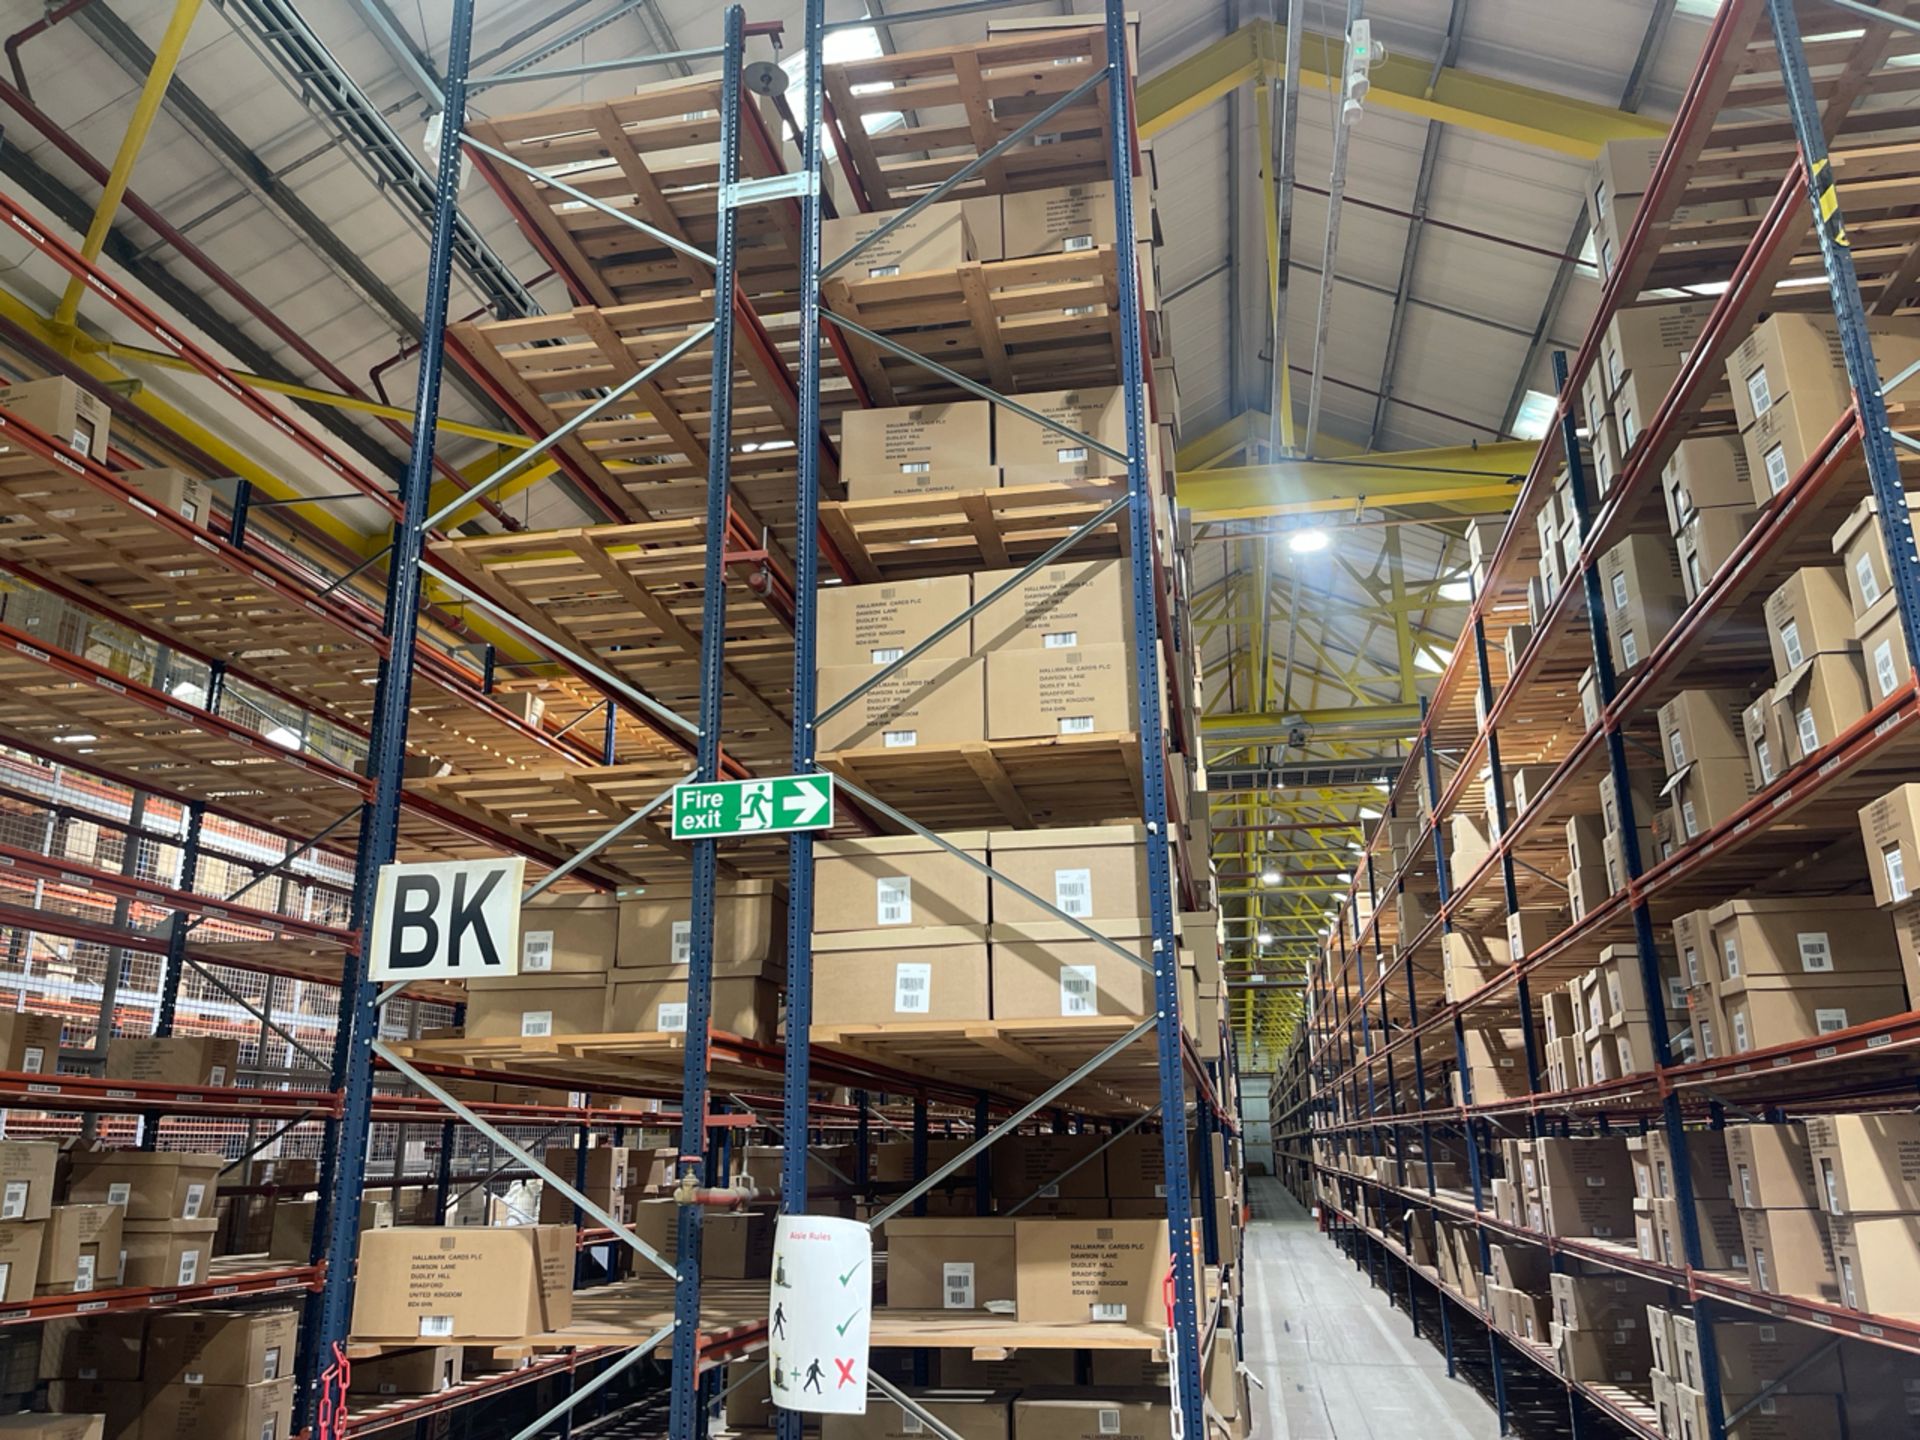 Run Of 24 Bays Of Back To Back Boltless Industrial Pallet Racking